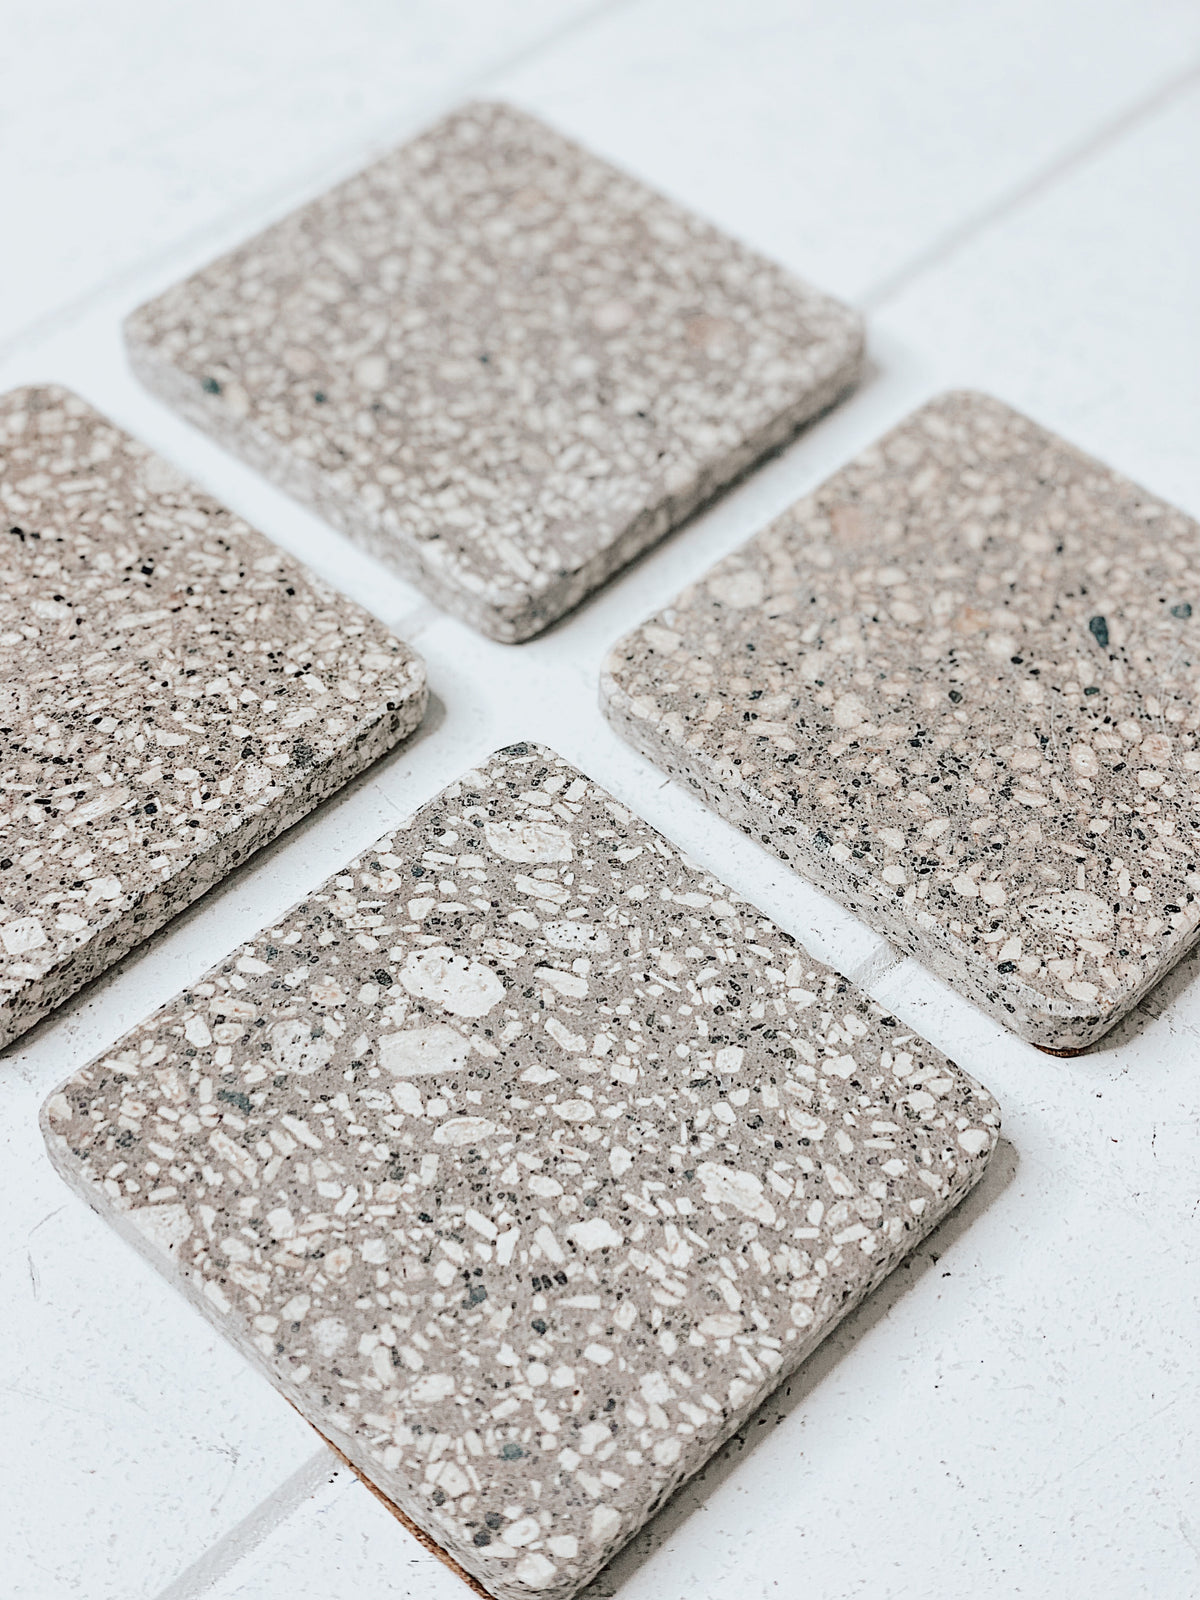 Complete your home in style with our on trend Terrazzo Grey Coasters in a Set of 4. This sleek design and matte finish will spruce up your dining table. Place on your coffee table or add a luxe touch to your next dinner party. Measures: 10x10cm.